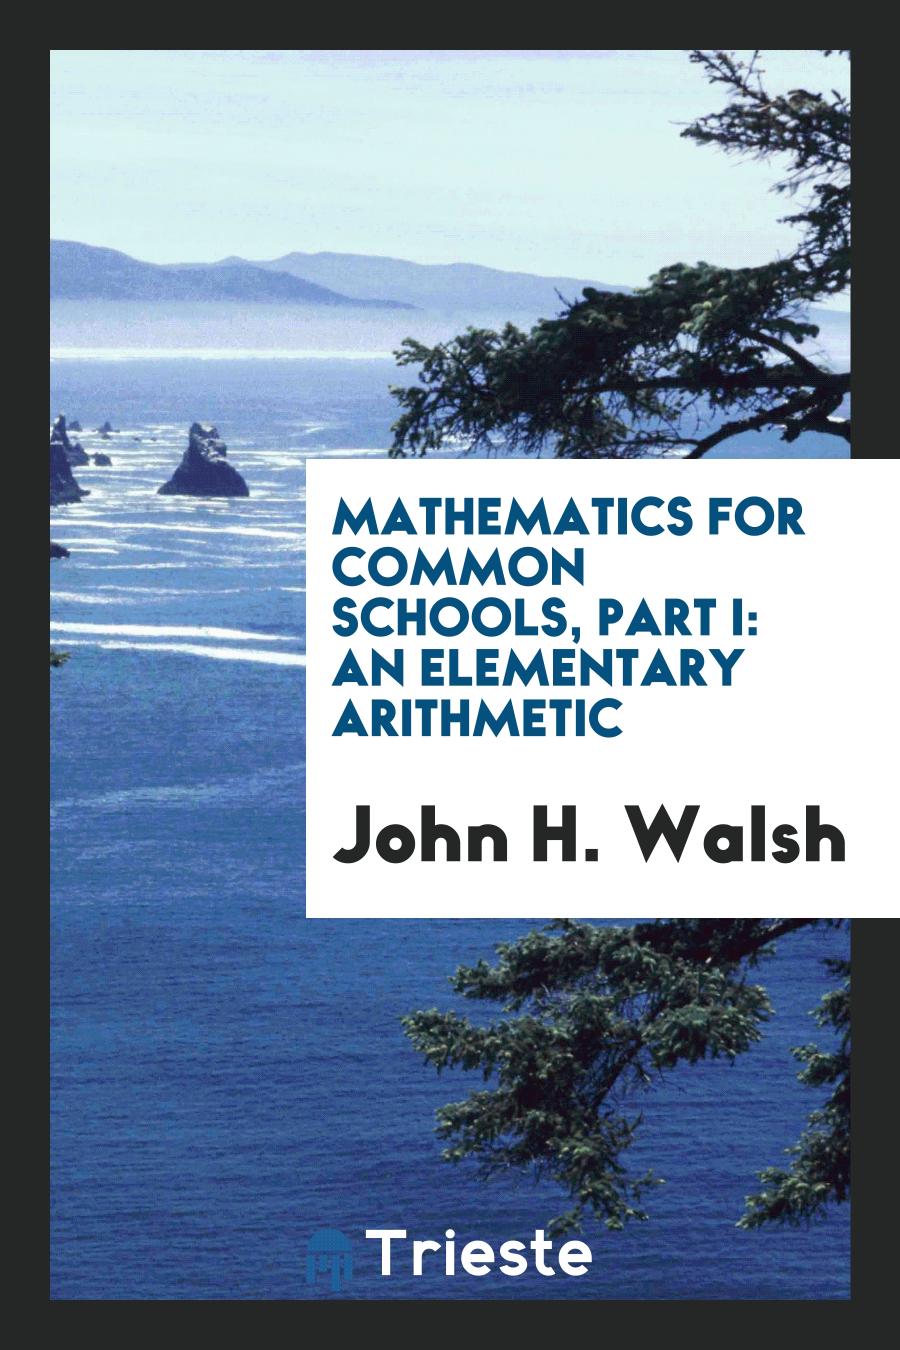 Mathematics for Common Schools, Part I: An Elementary Arithmetic